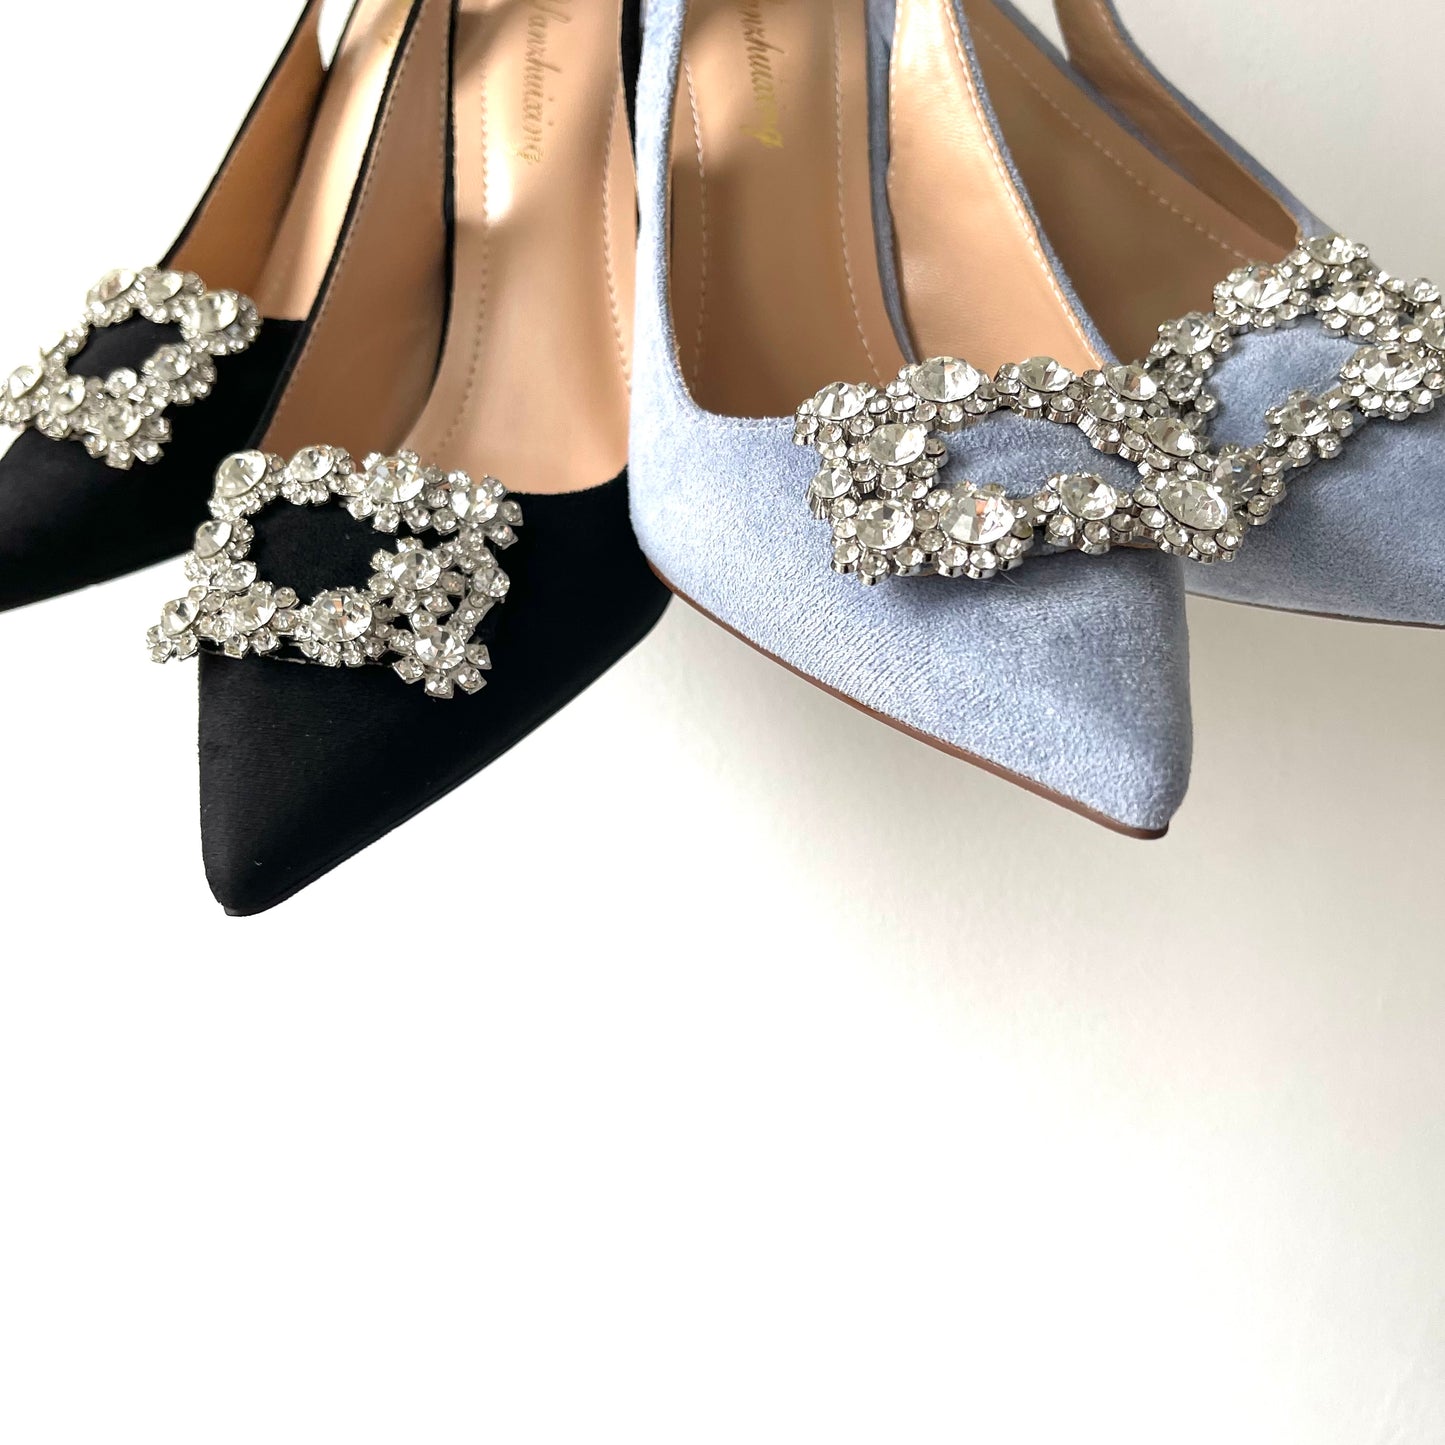 CRISTAL  BLUE SUEDE POINTED TOE  HEELS